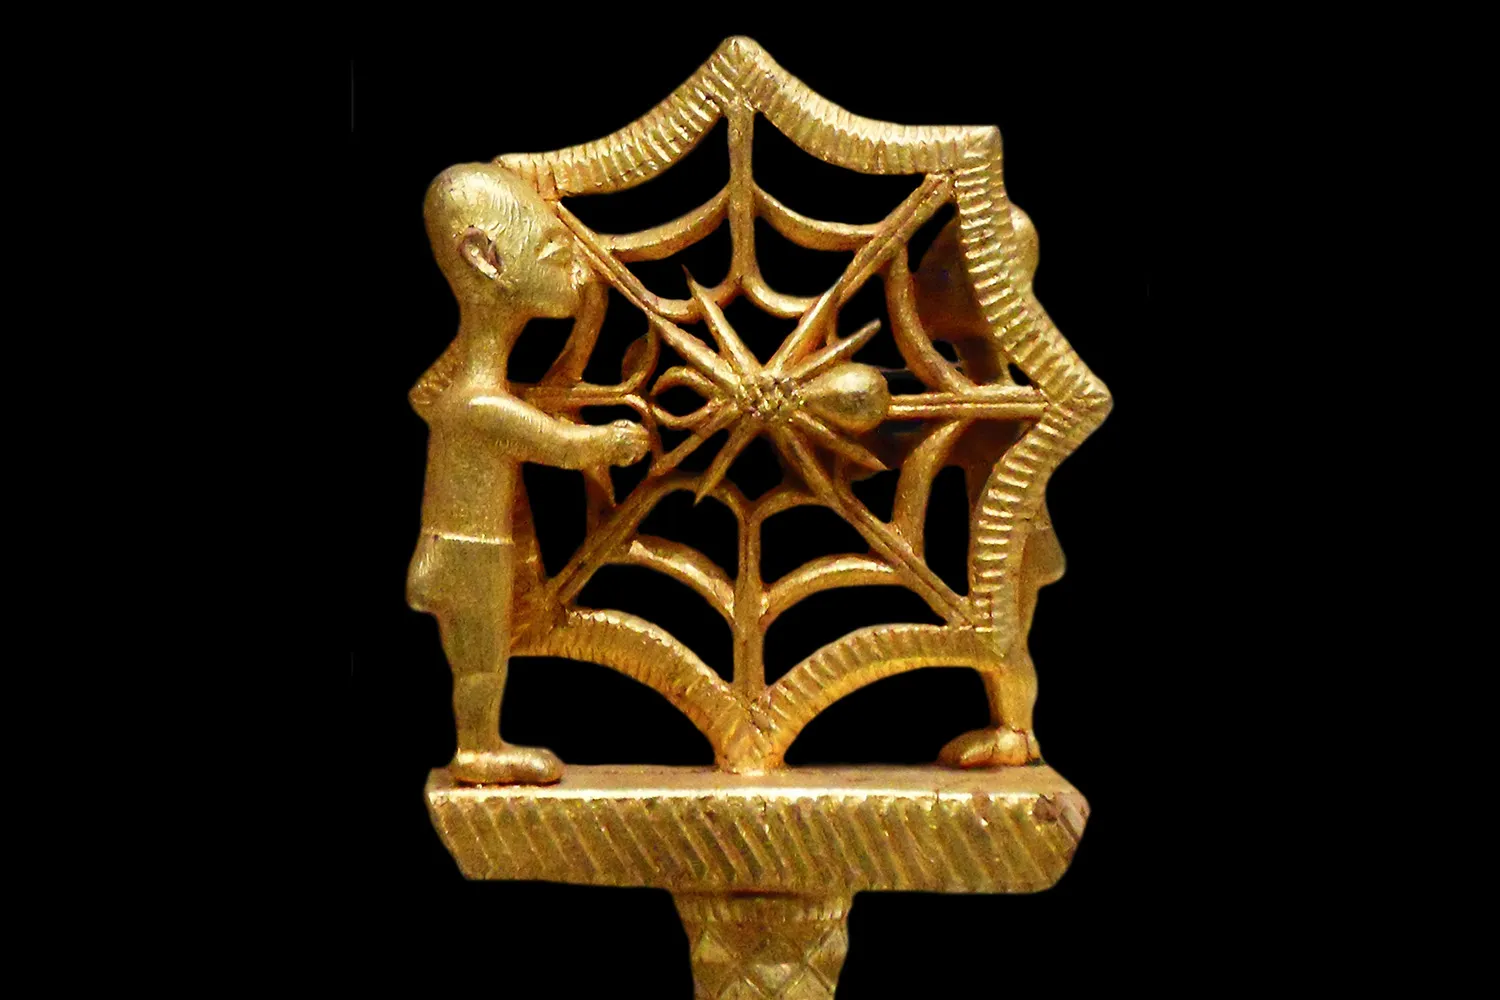 A linguist staff from the 19th century, which would have been carried by high-ranking Akan officials in the Gold Coast or Ghana, depicts Anansi.